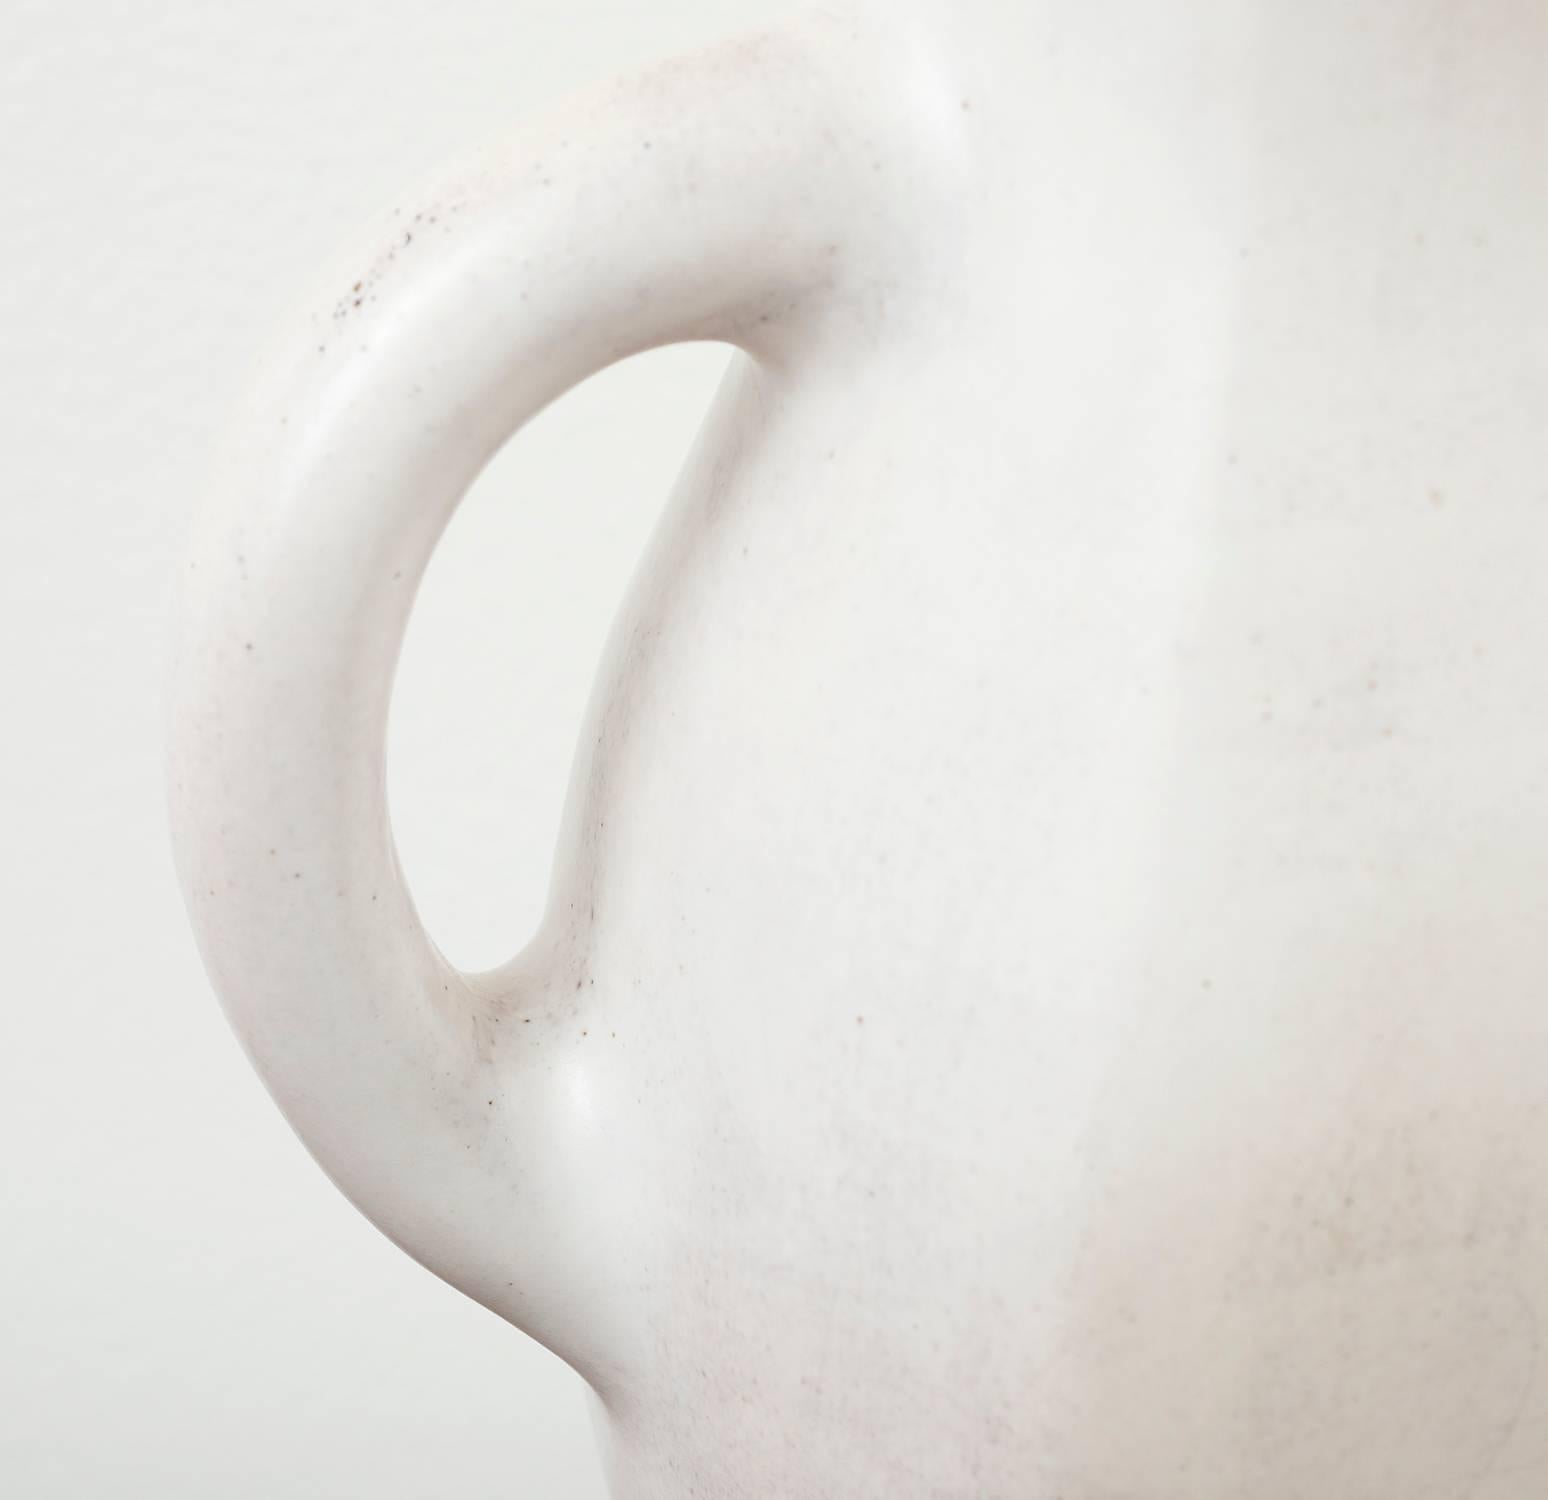 Mid-Century Modern Large White Ceramic Pitcher by Georges Jouve with Black Rim, 1950